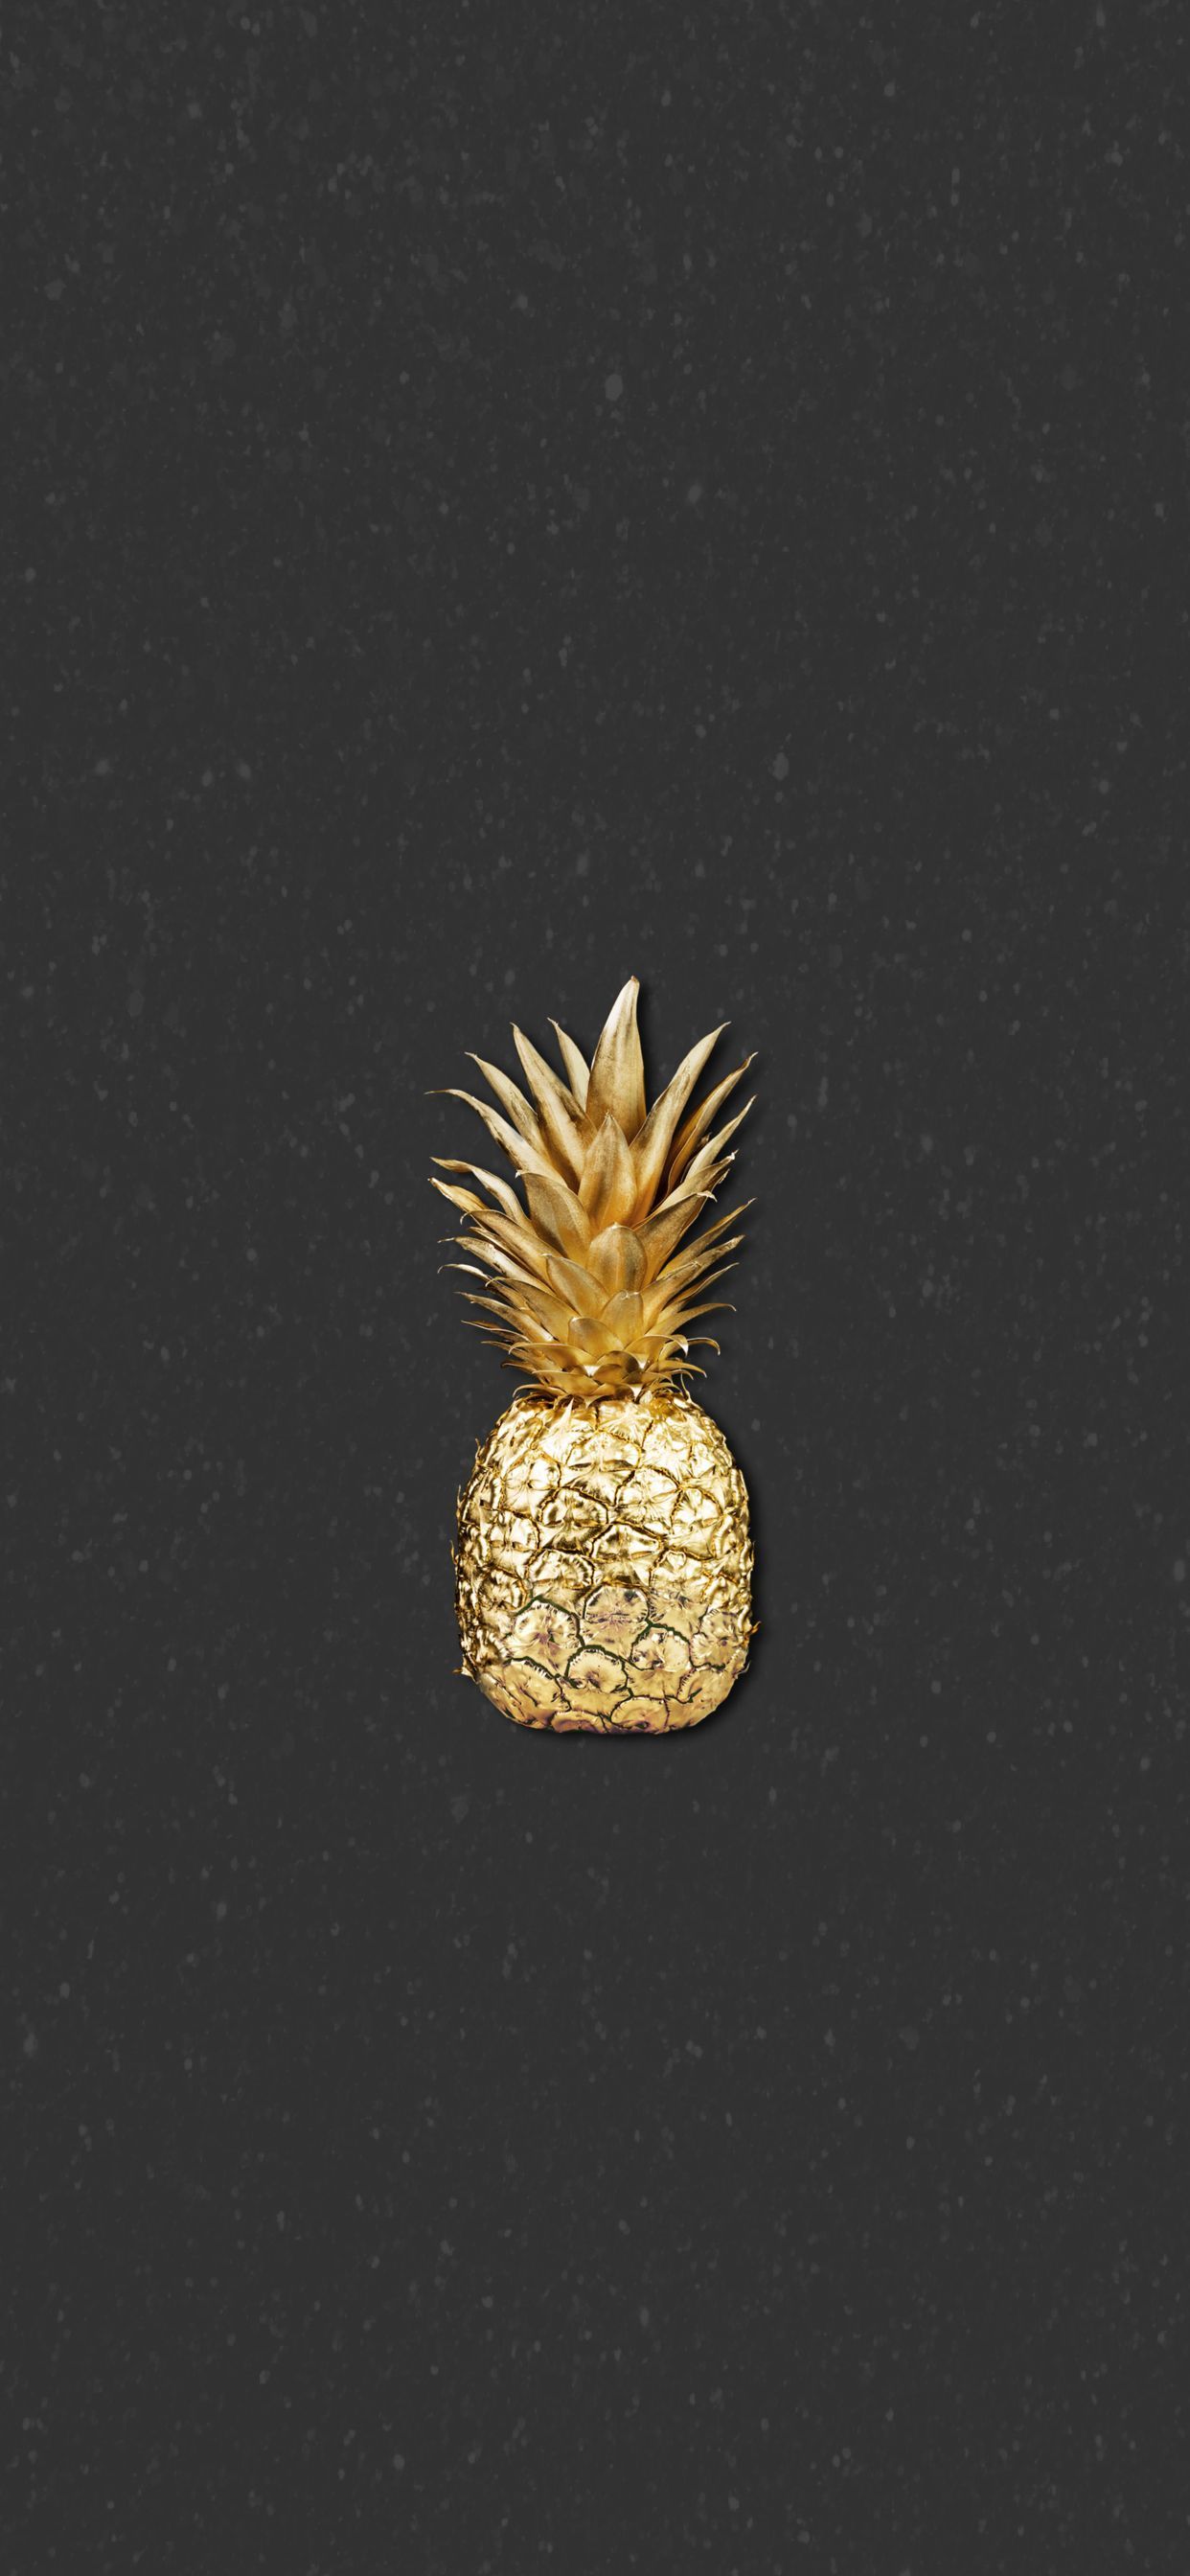 A gold pineapple on a black background - Gold